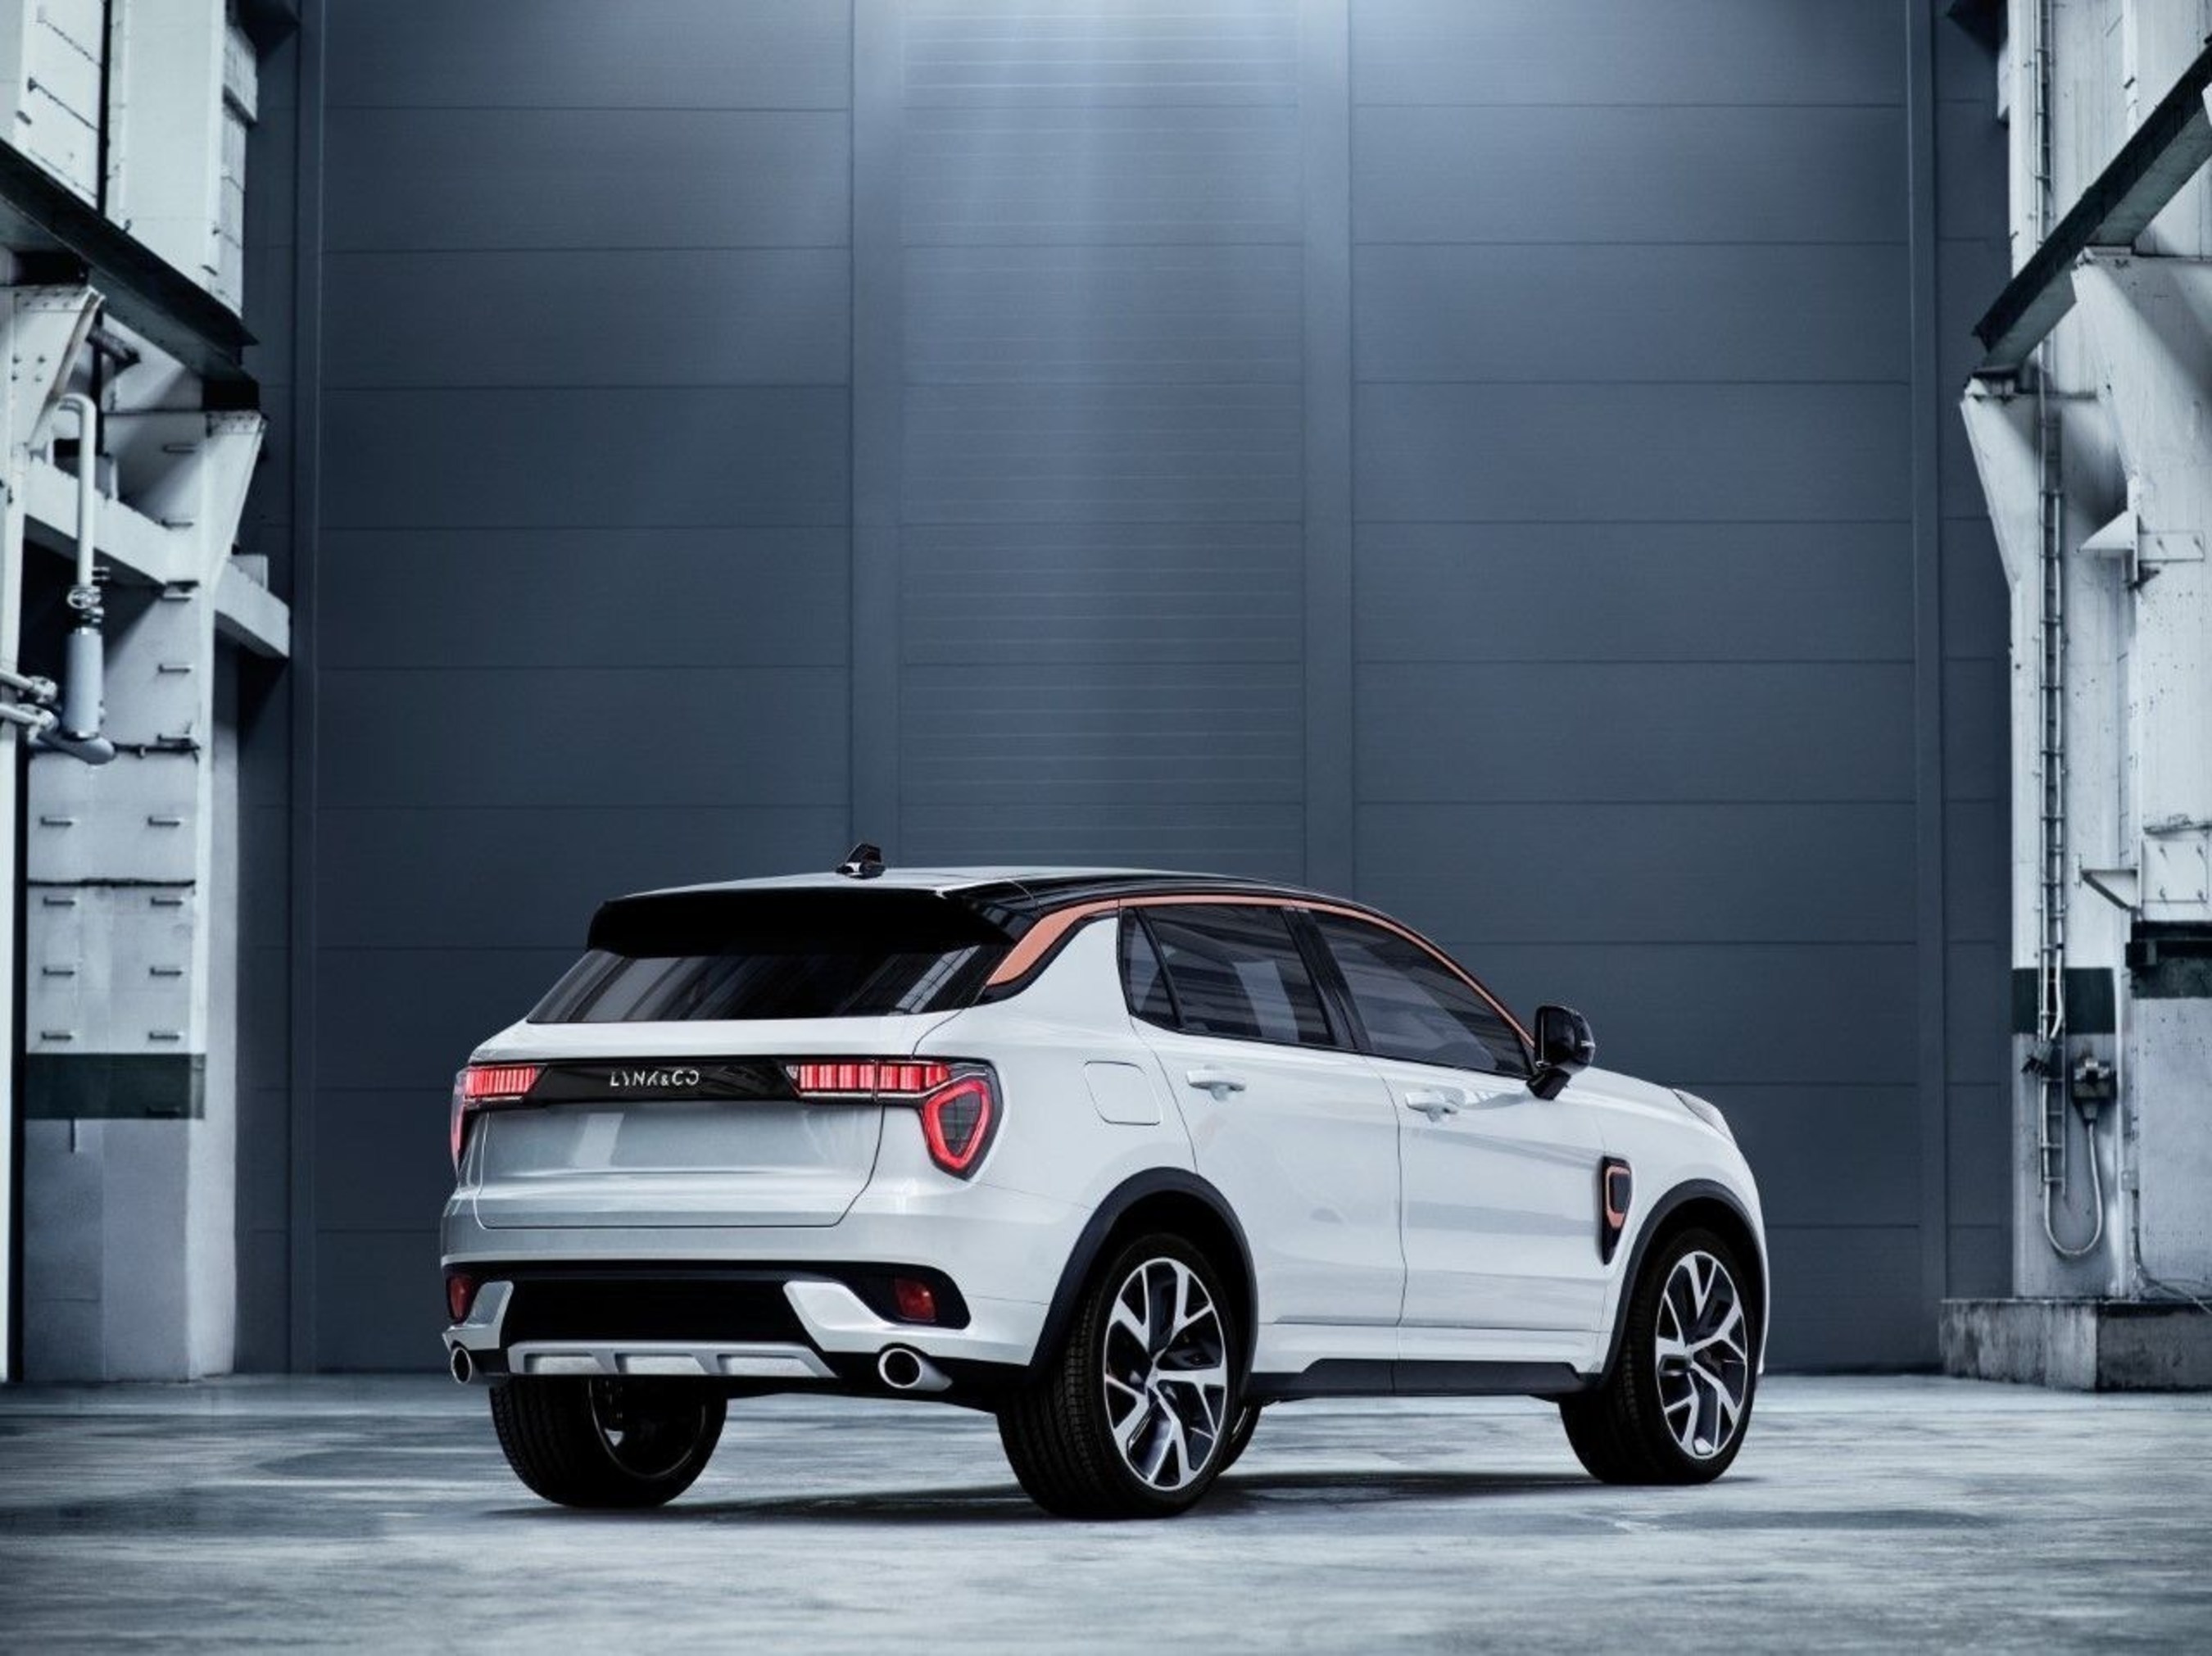 LYNK & CO. A new car brand with built-in sharing and ownership solutions. (PRNewsFoto/LYNK & CO)